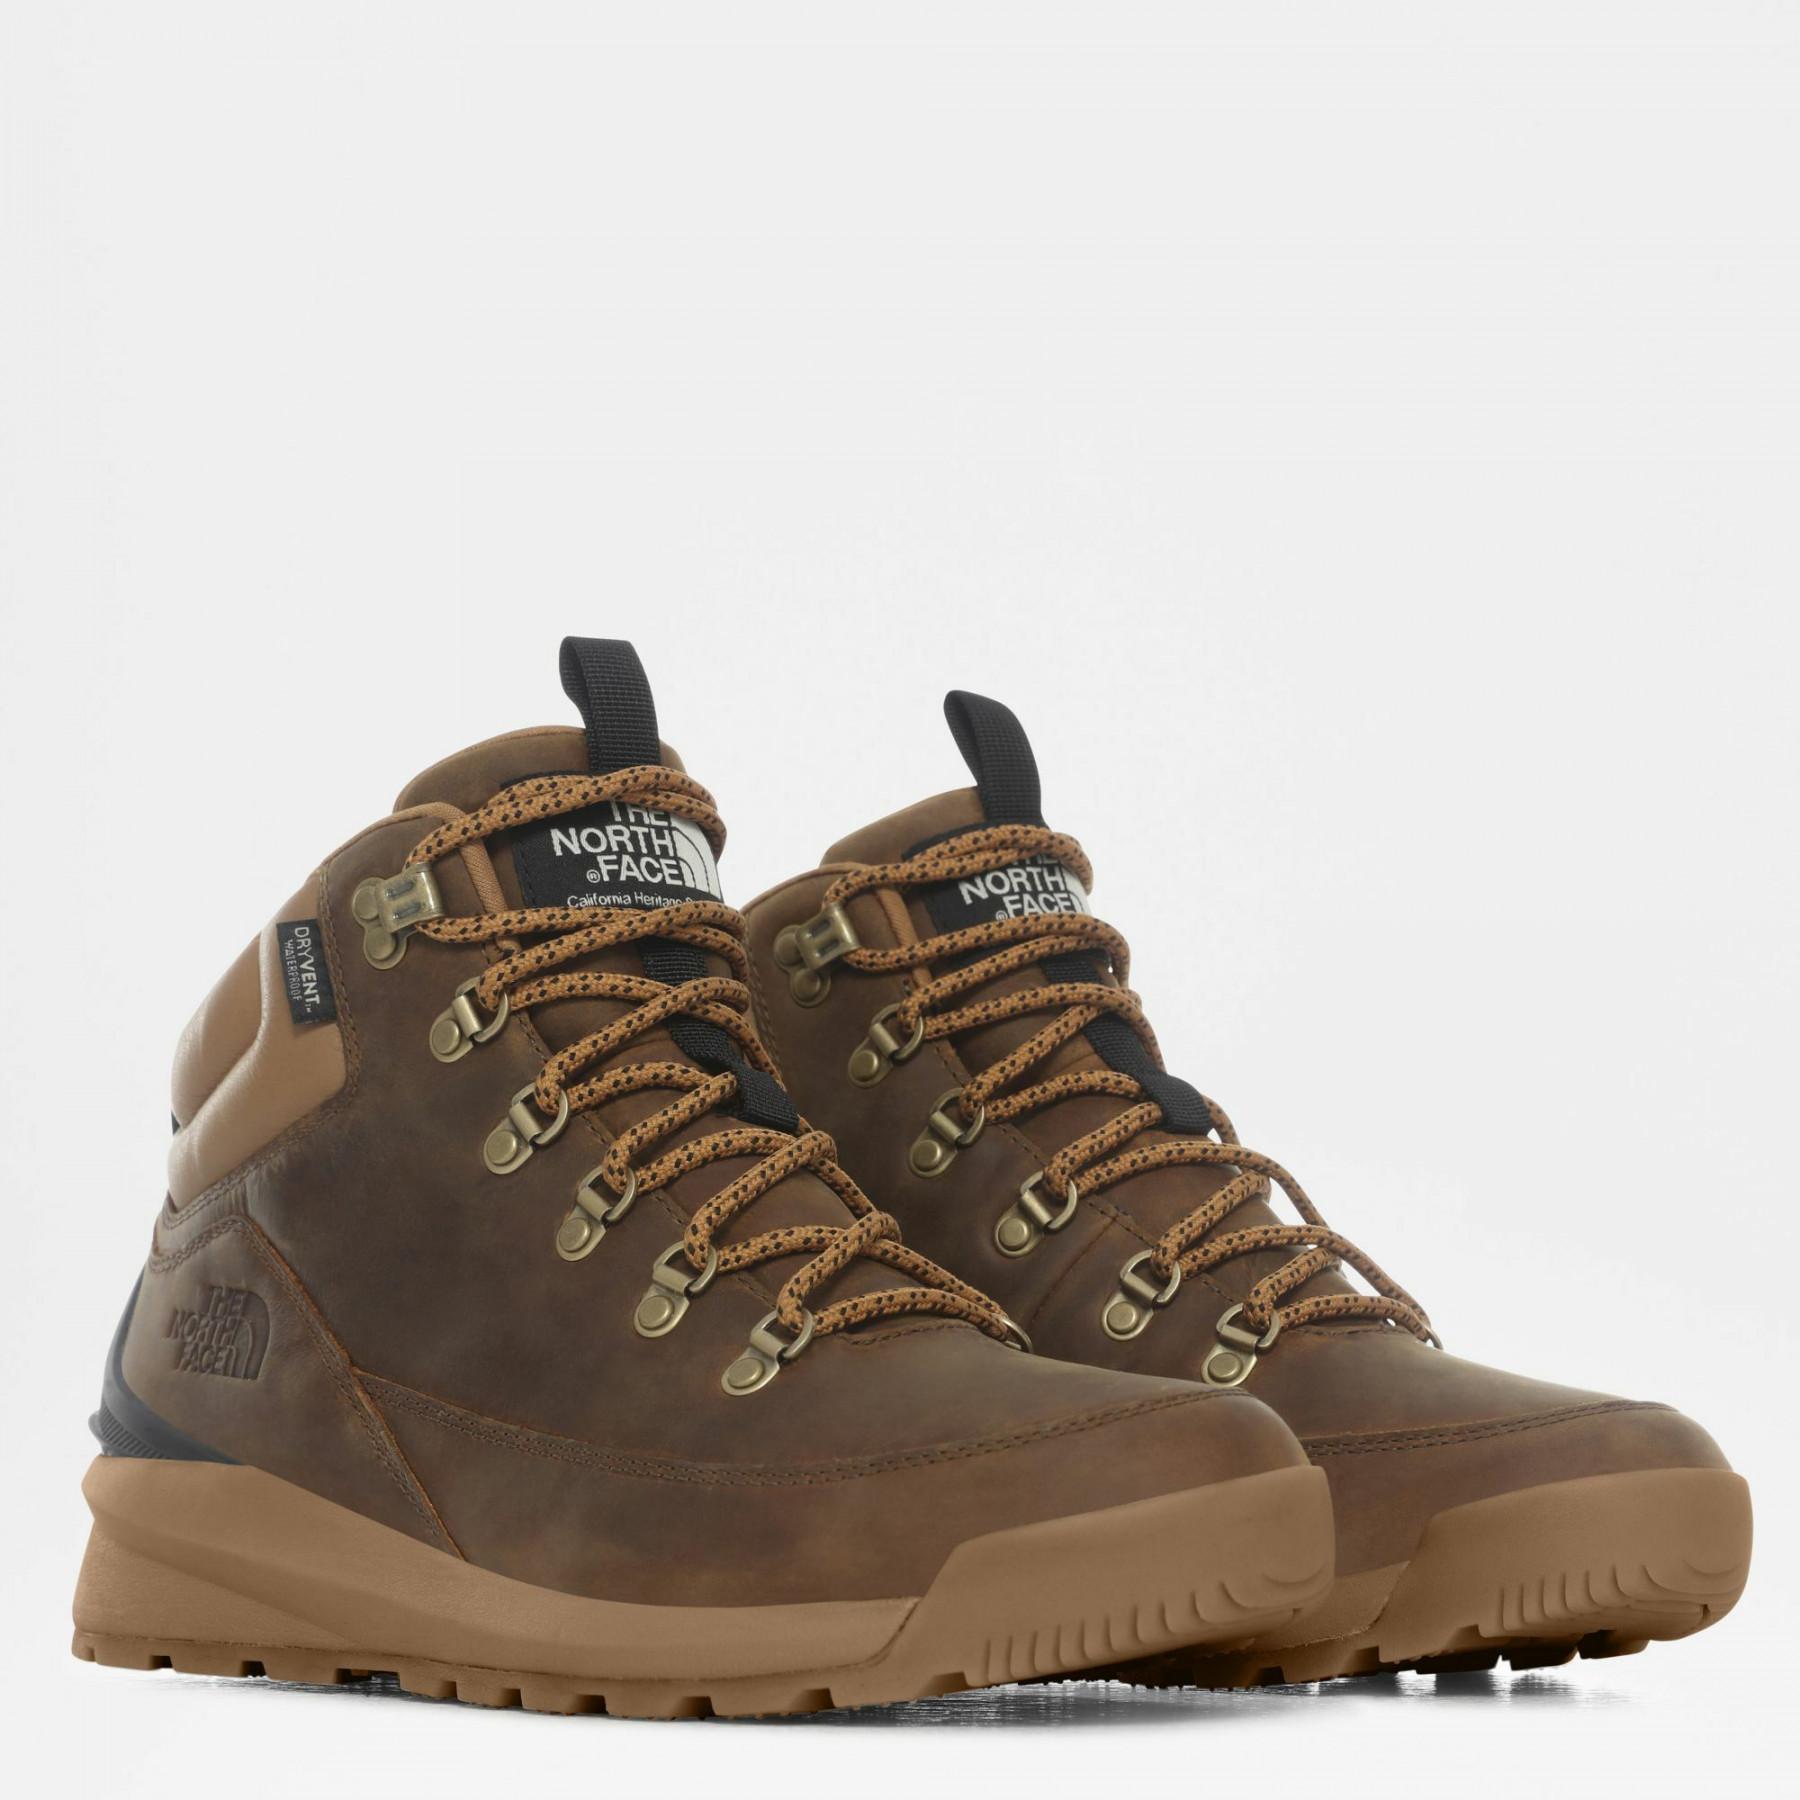 Tränare The North Face Premium waterproof-leather